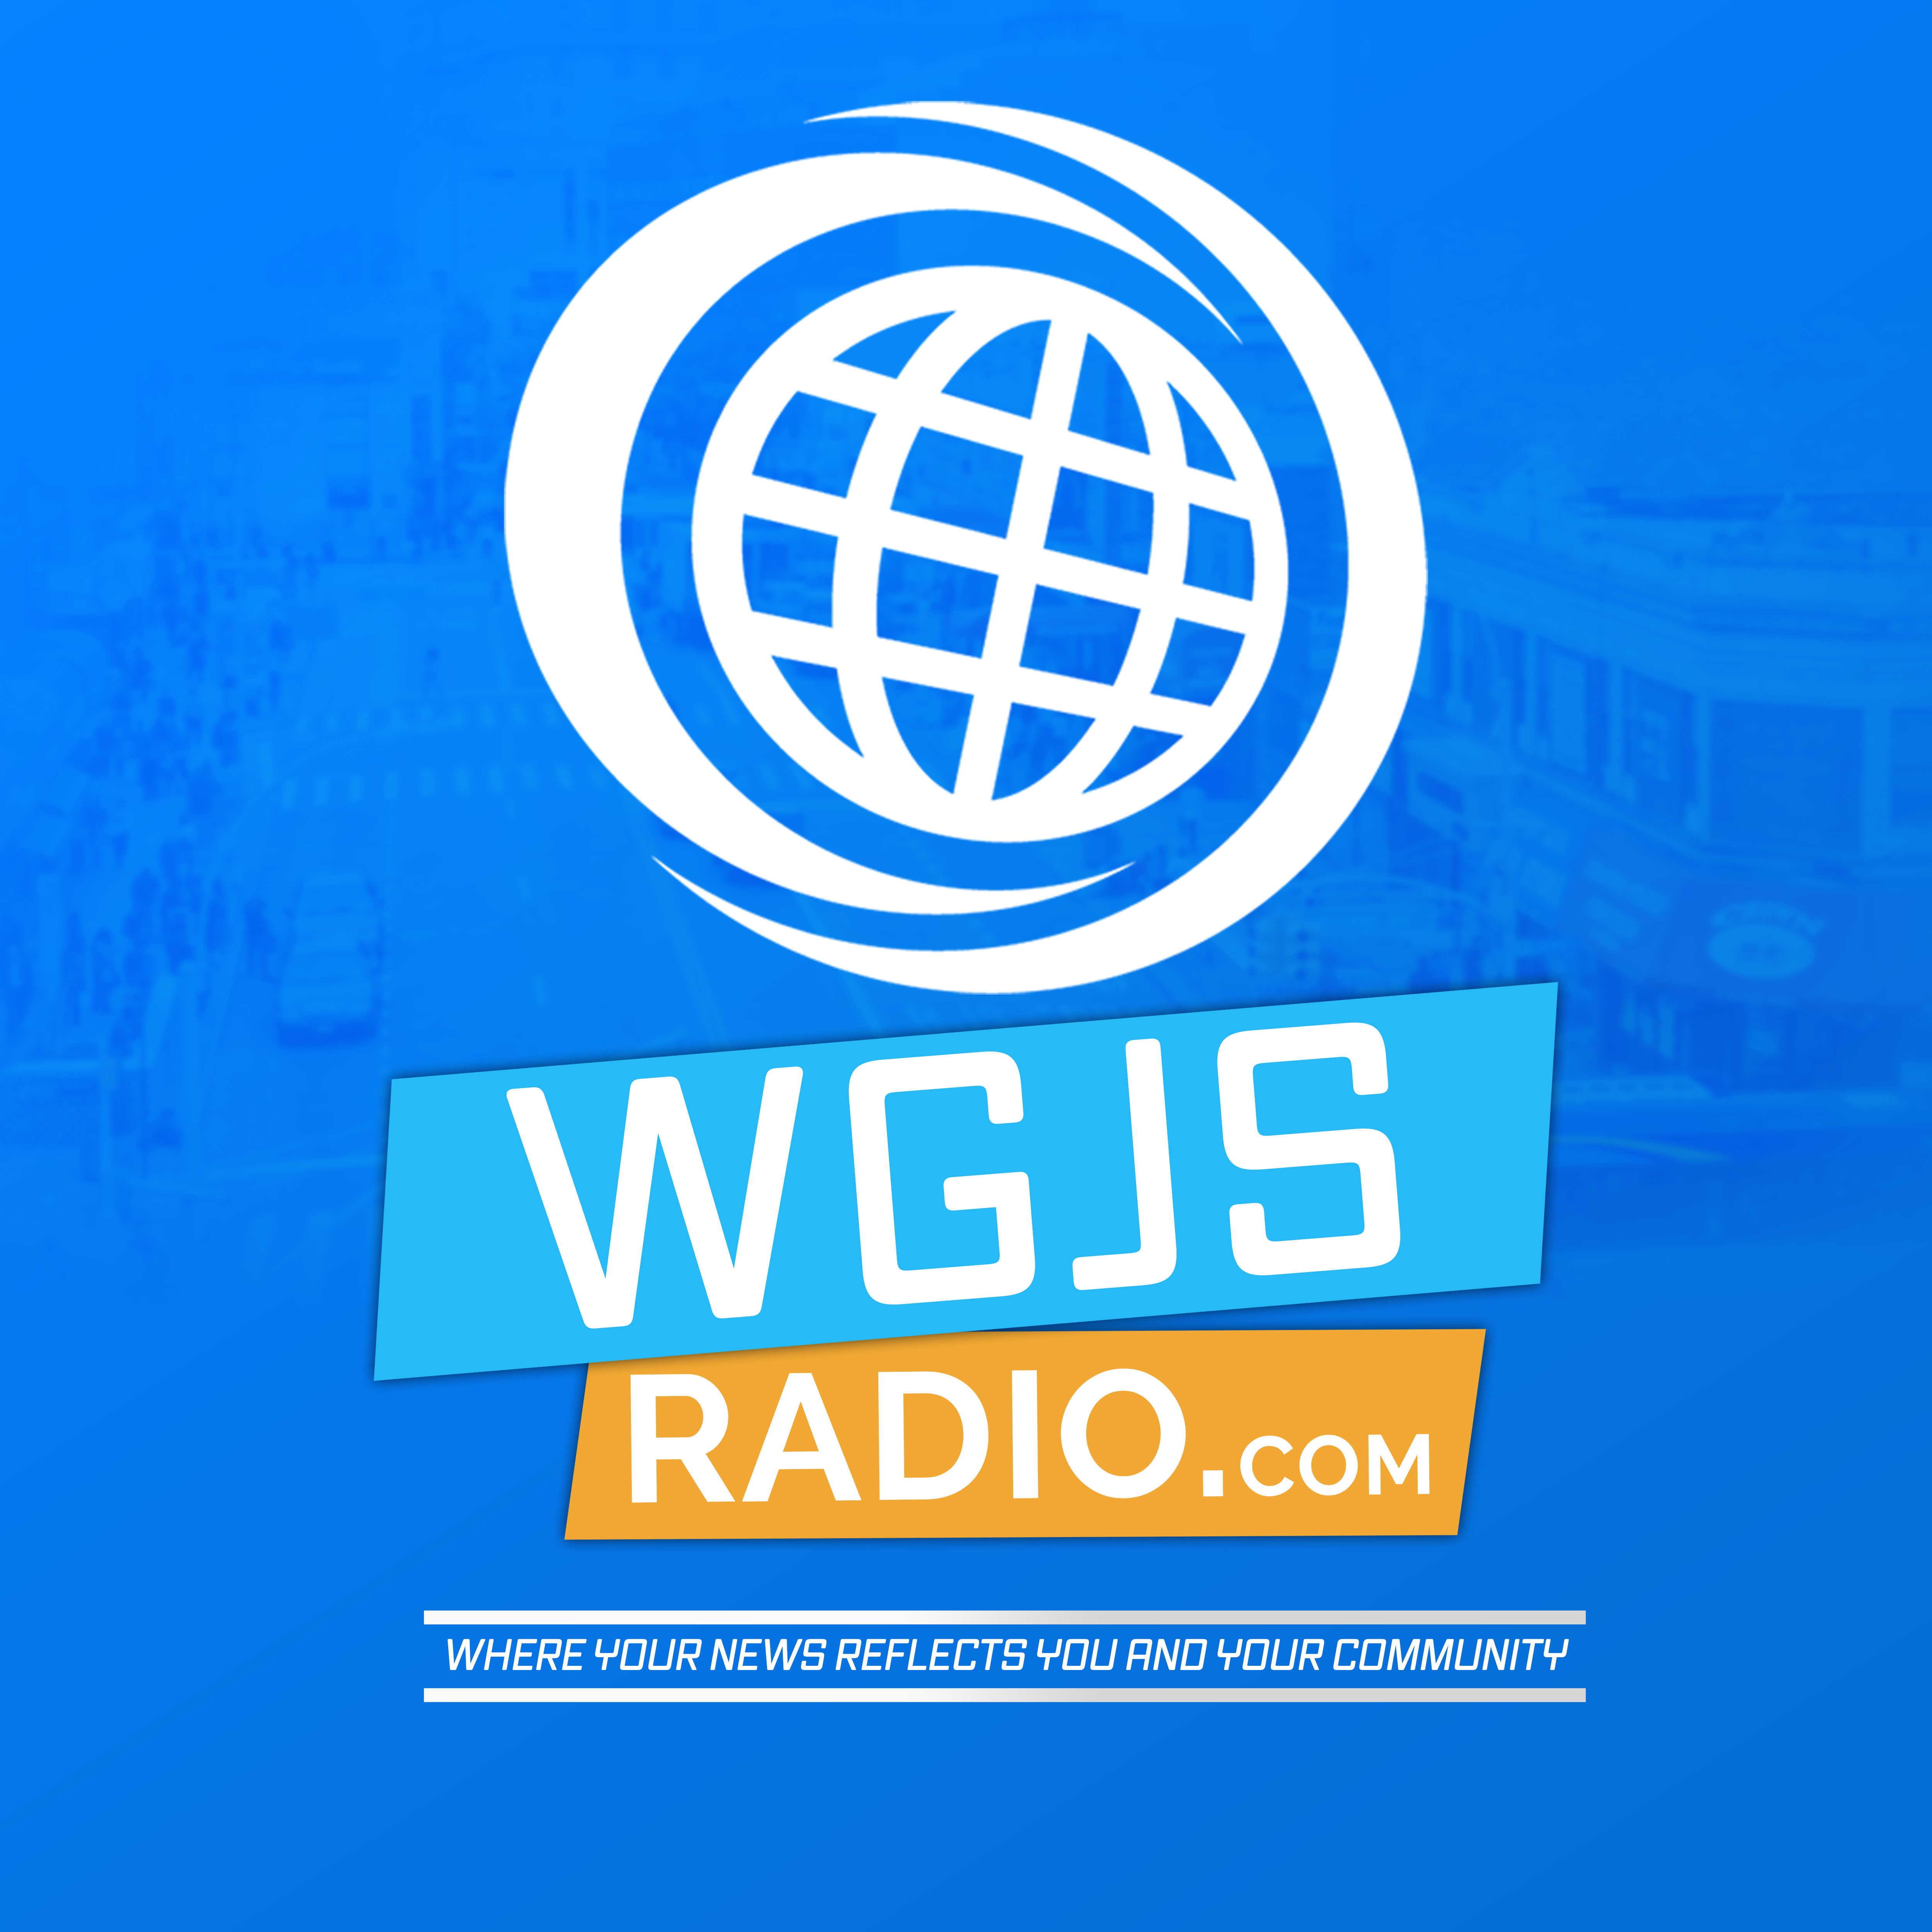 Art for WGJS Radio Drop2 by ChevyPalm